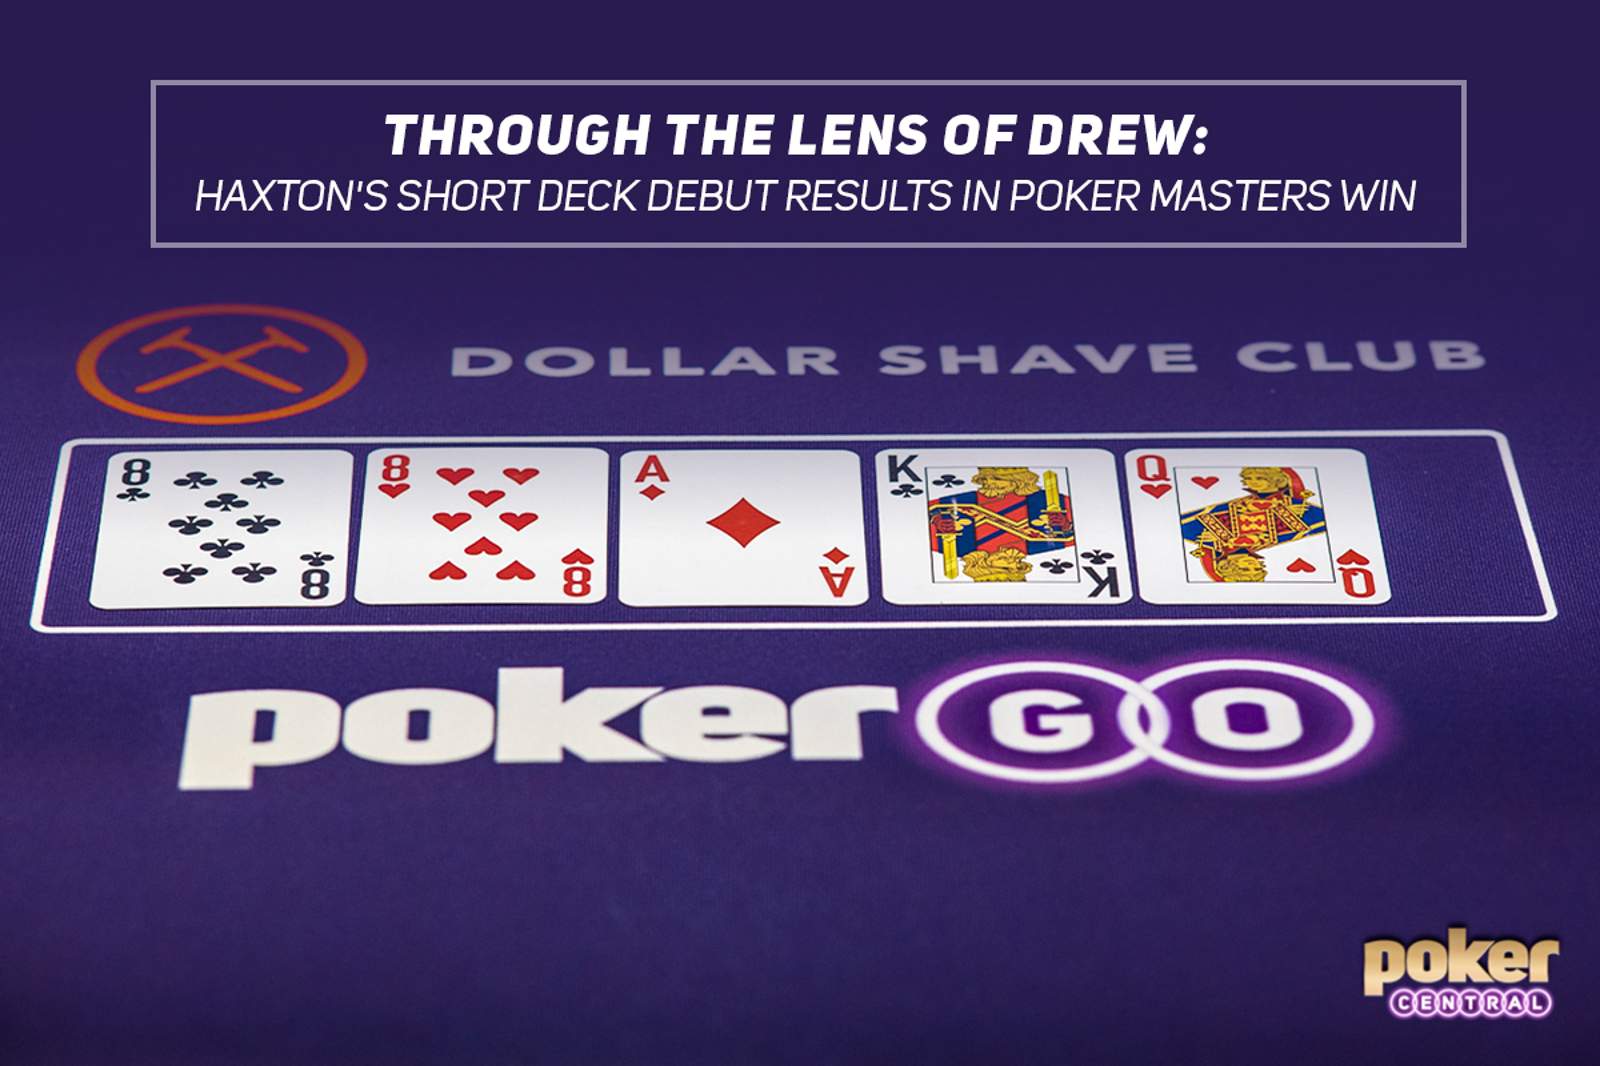 Through The Lens of Drew: Haxton's Short Deck Debut Results in Win